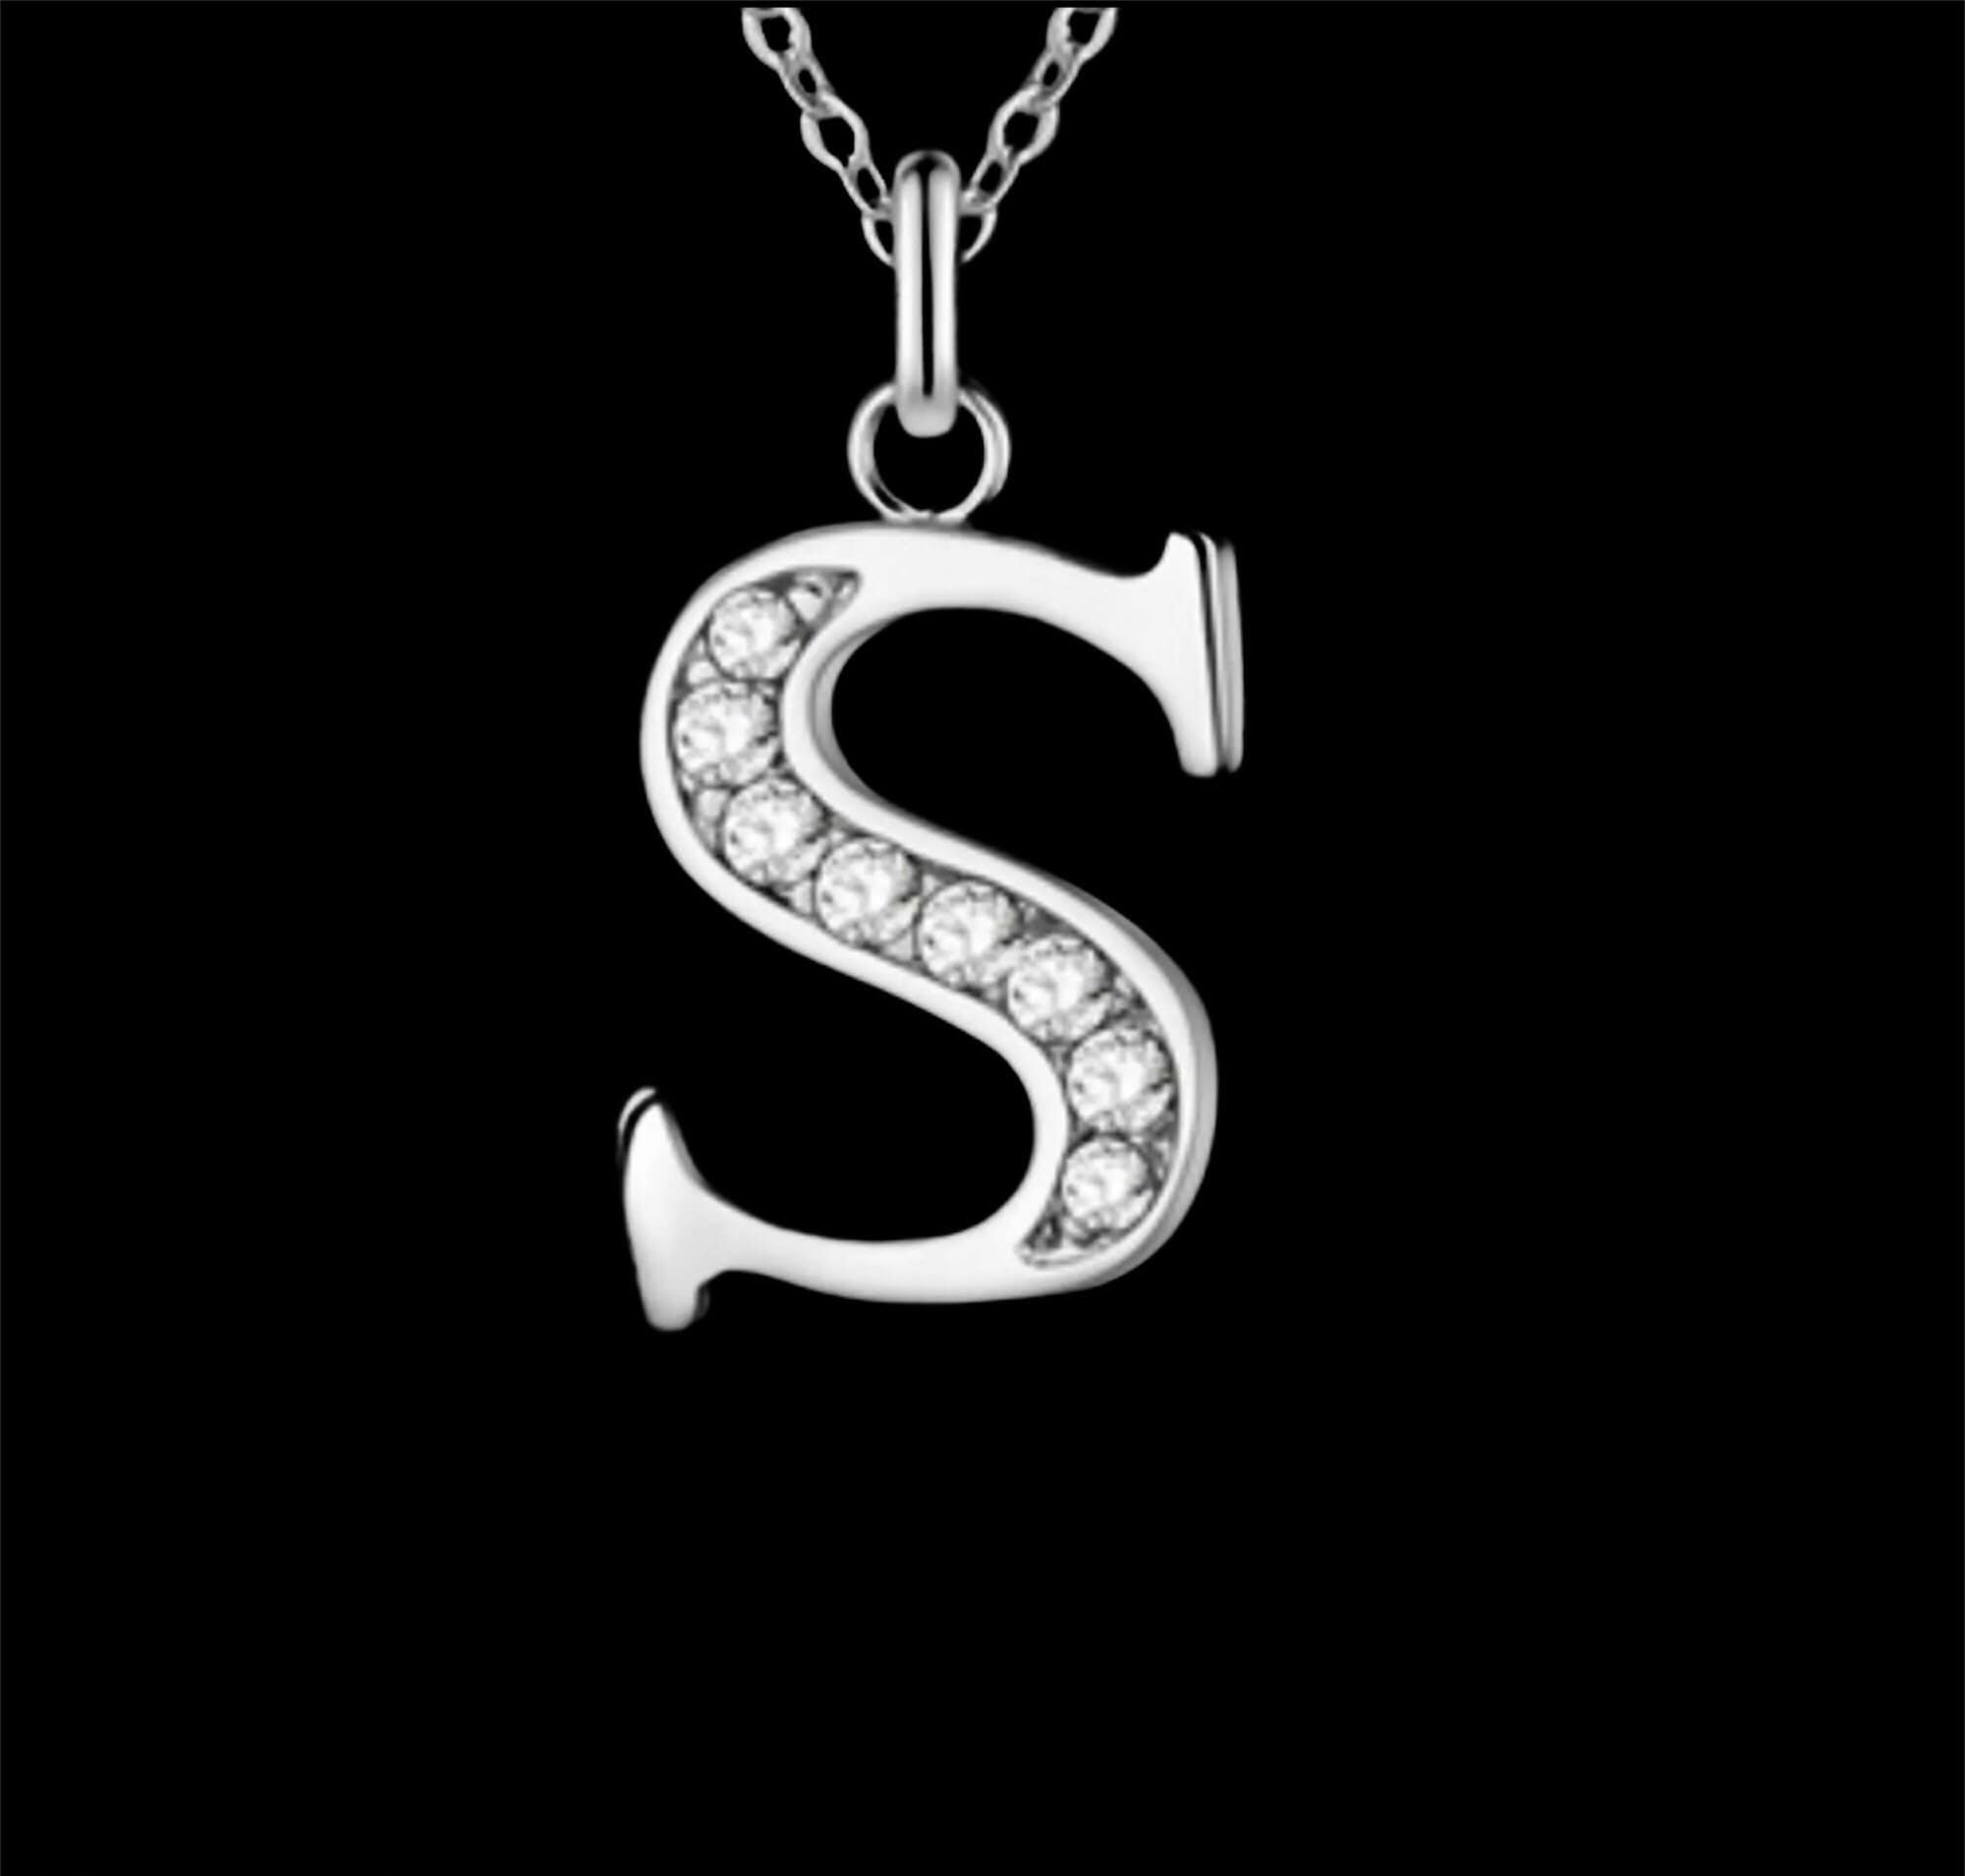 S - Letter Name Necklace Initial Necklace – Segal Jewelry